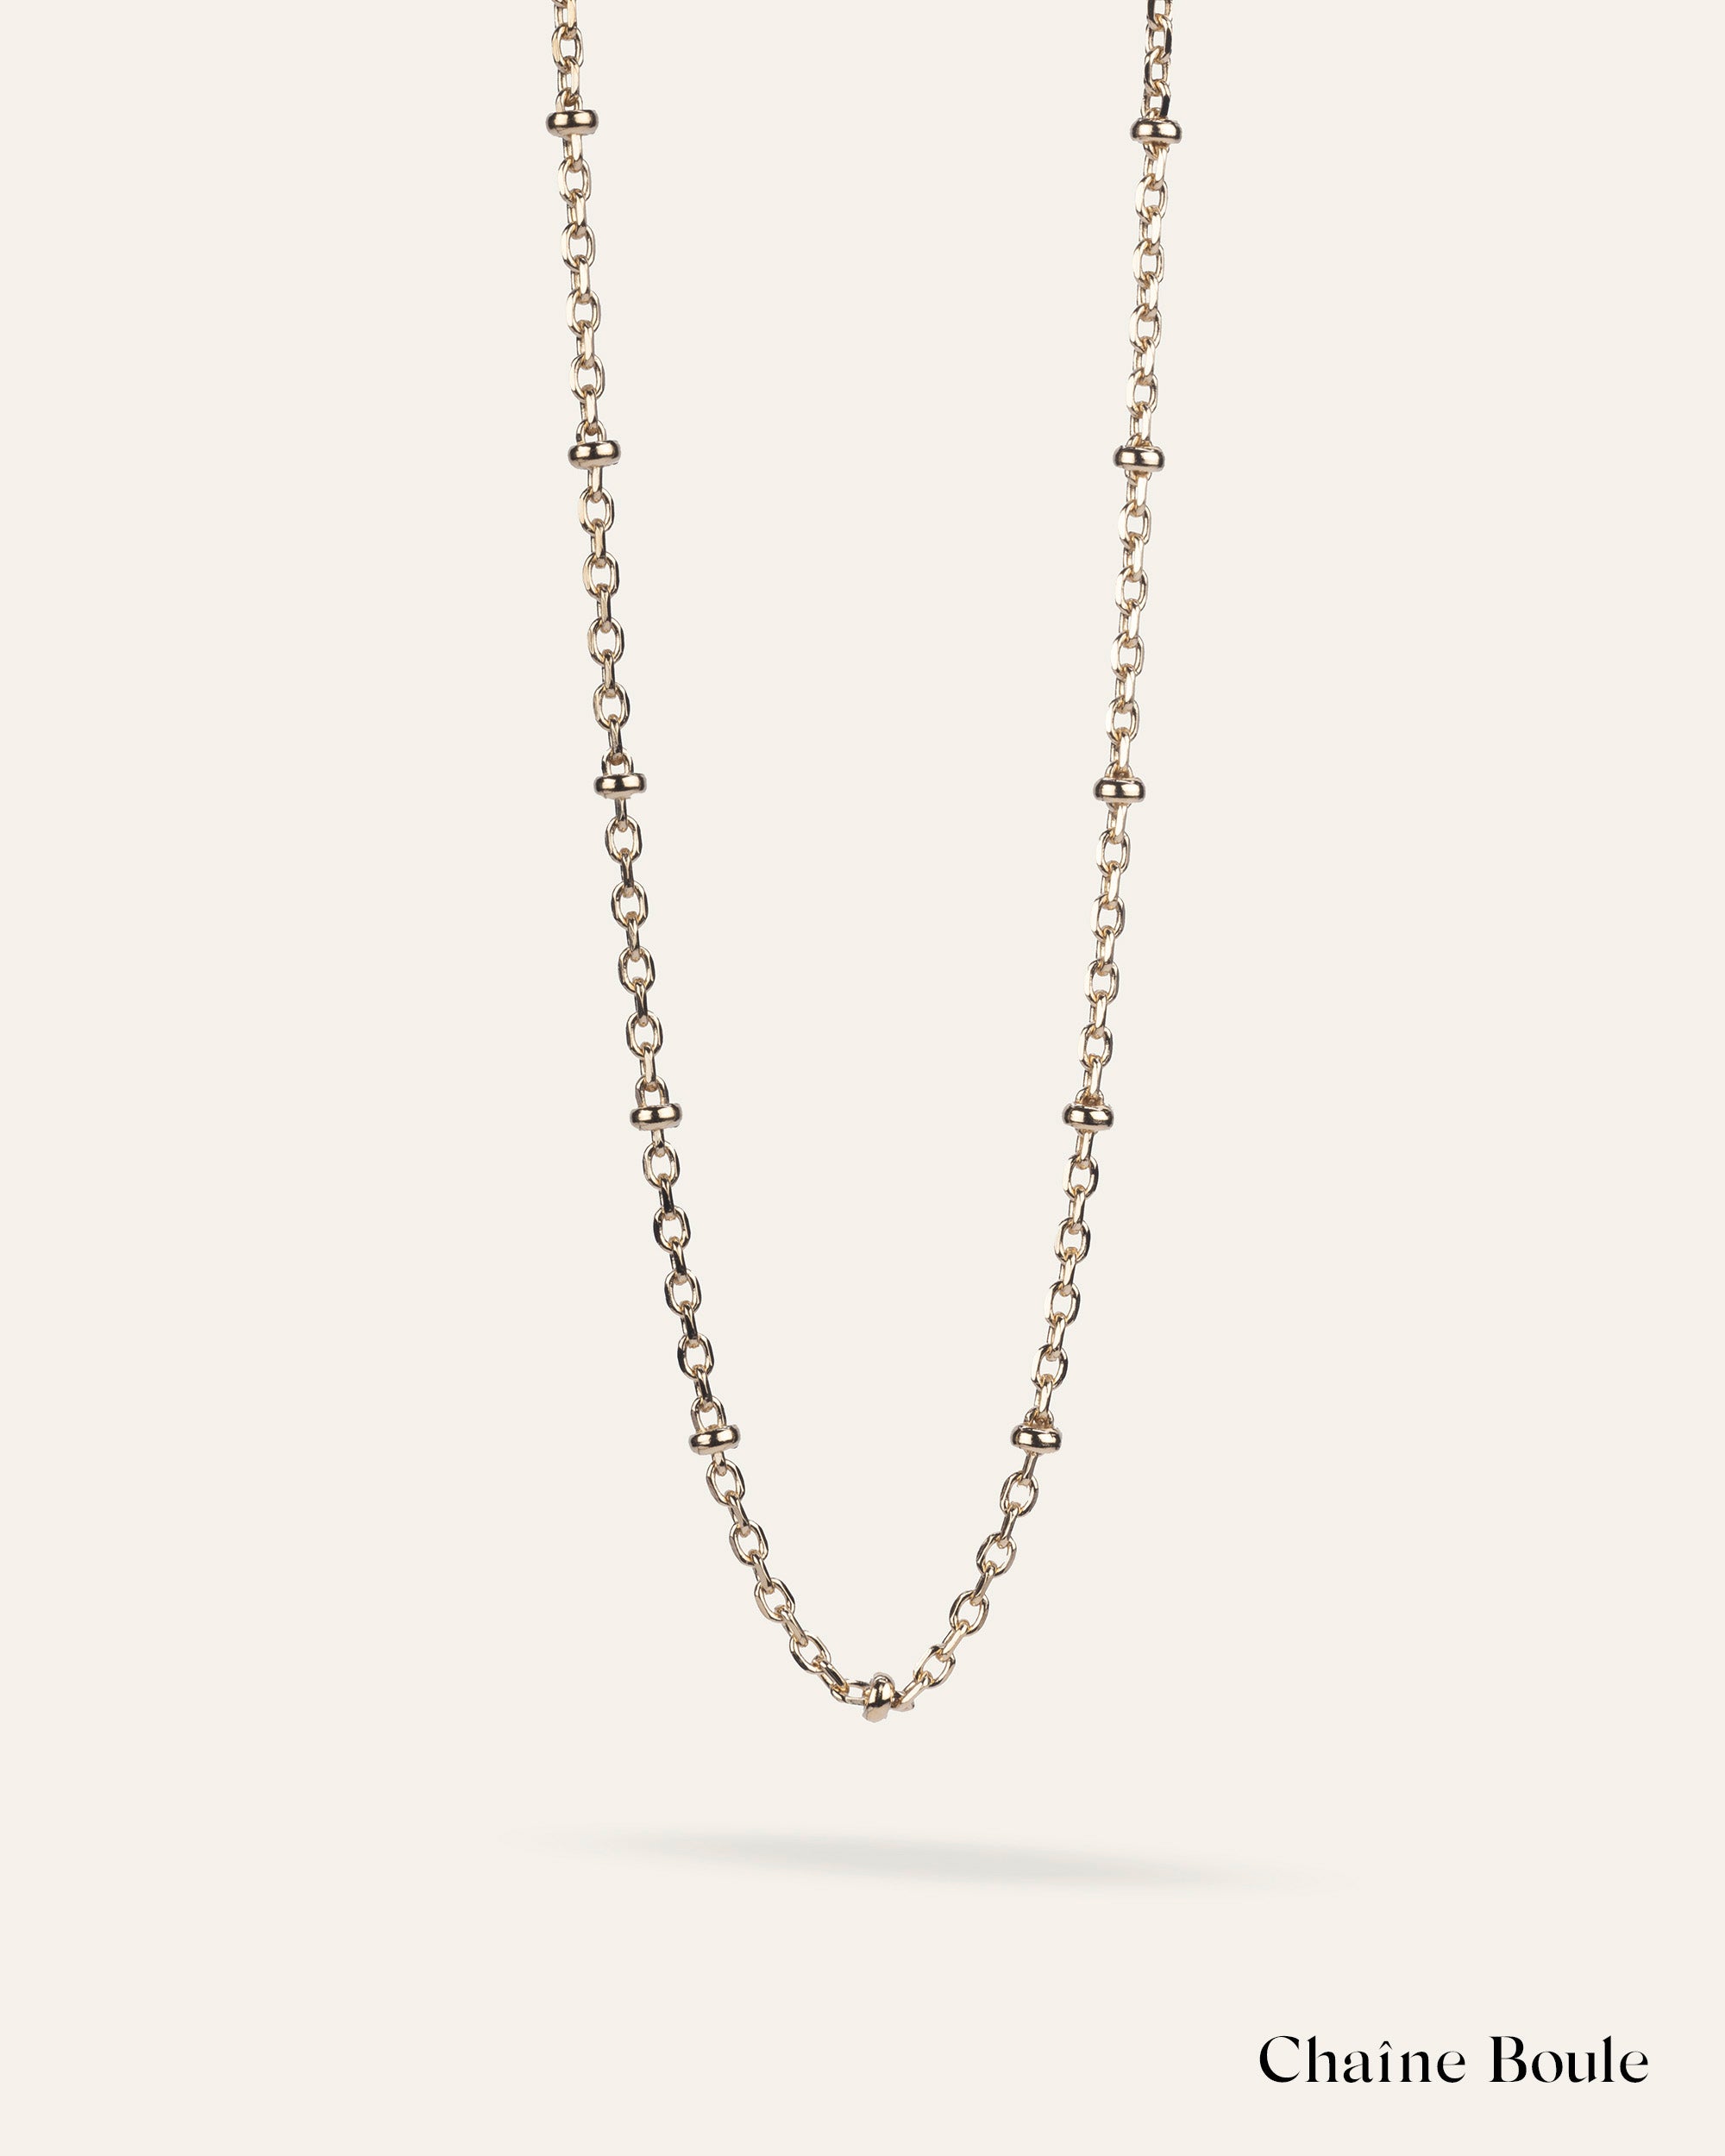 Long ball chain necklace in gold